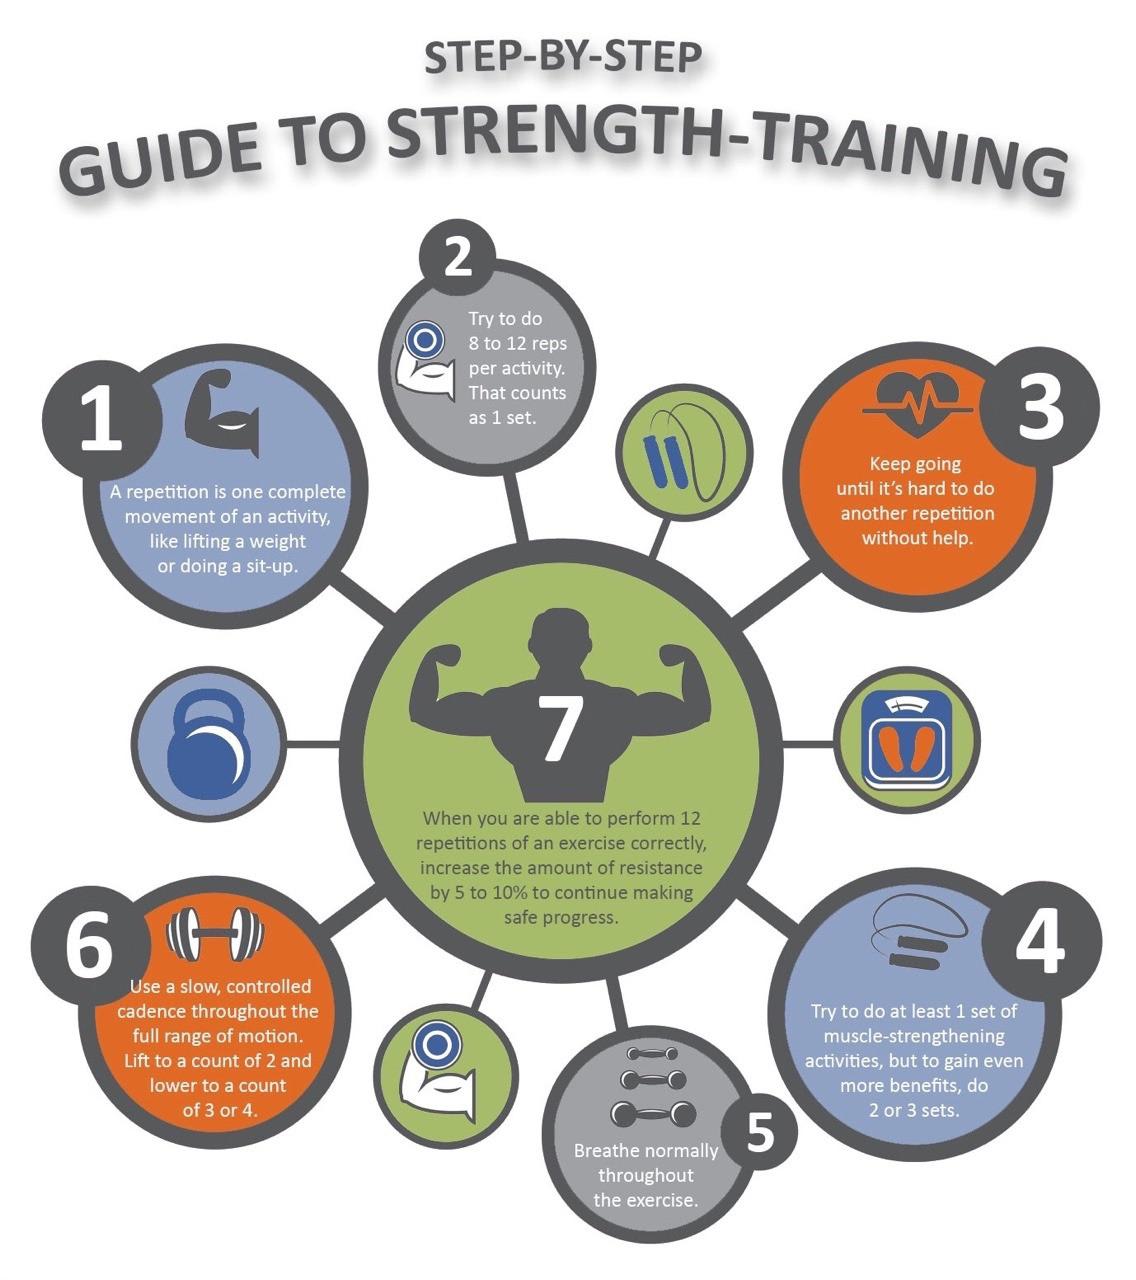 Guide to strength training